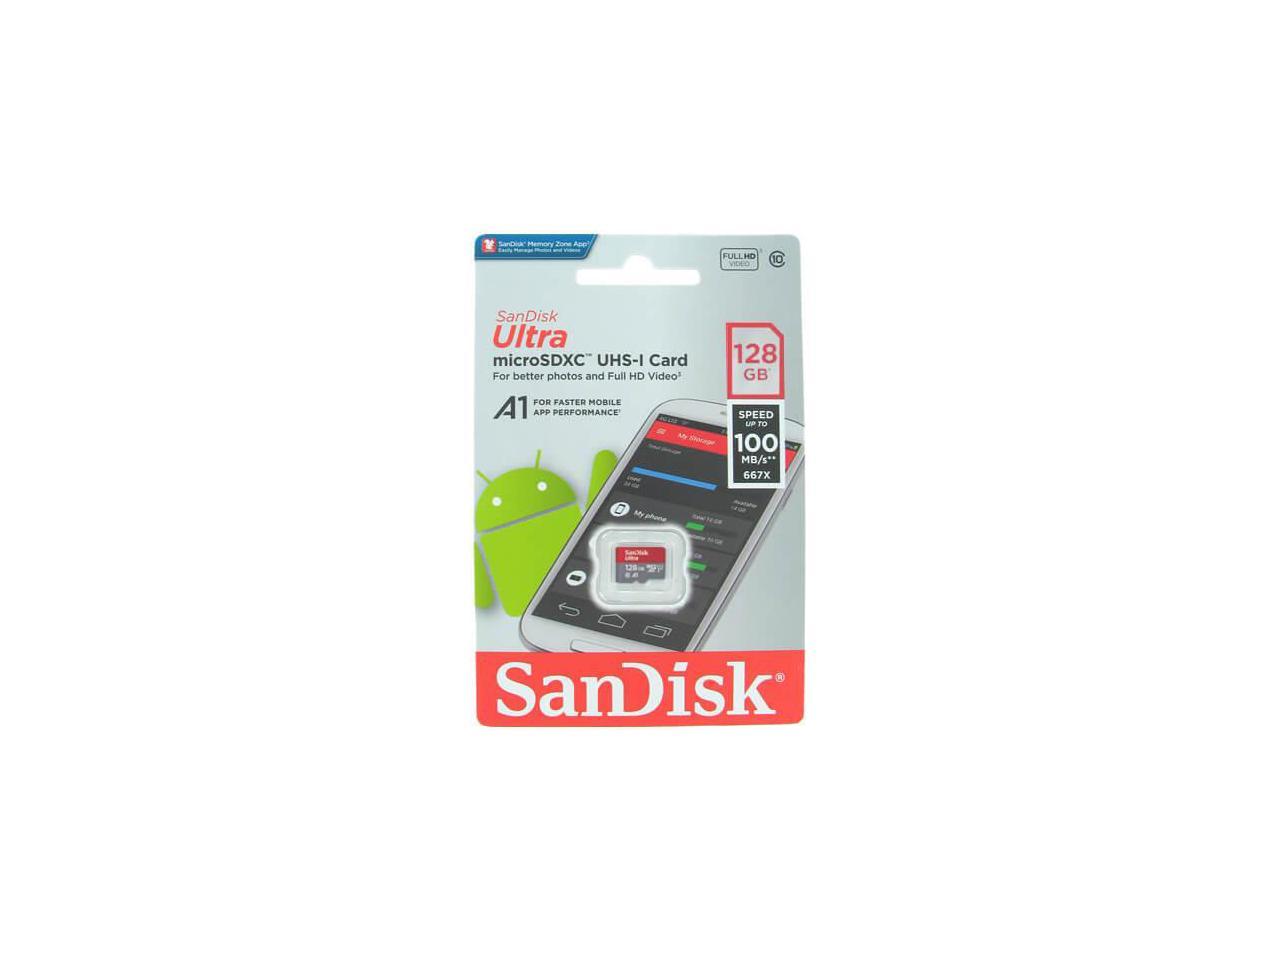 Sandisk Sdsquar 128g Gn6mn Dcm 128gb 8p Msdxc R100mb S 667x Class 10 A1 Uhs I U1 Sandisk Ultra Micro Secure Digital Extended Capacity Card W O Adapter Retail Newegg Com